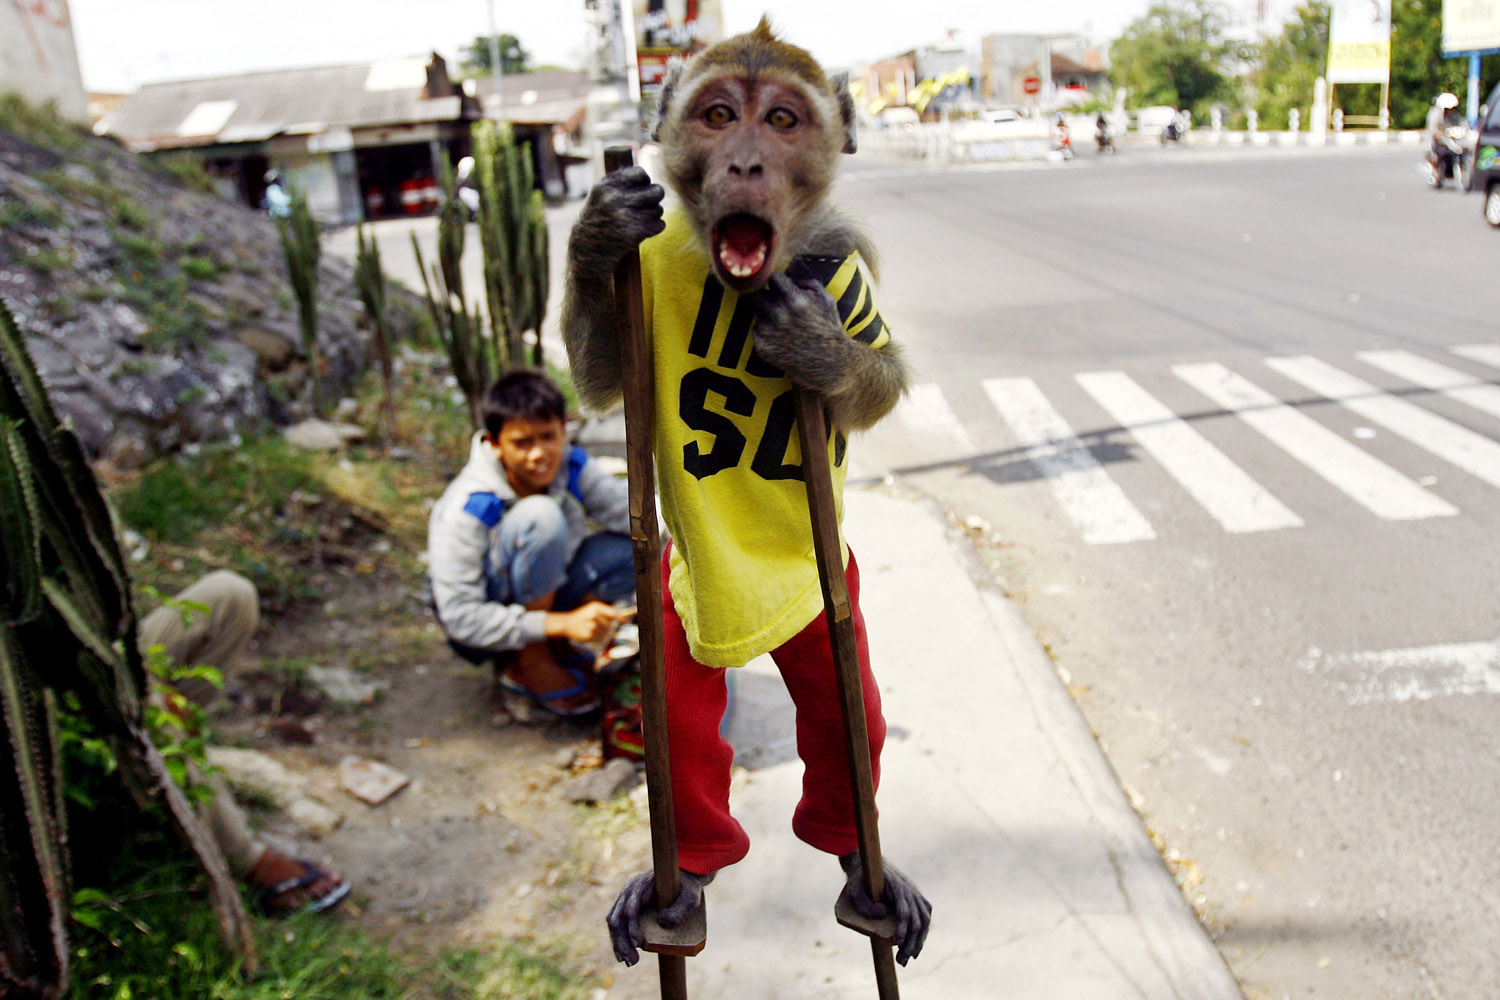 Oct. 28, 2013. A street monkey performs on a sidewalk in Solo, Central Java, Indonesia.